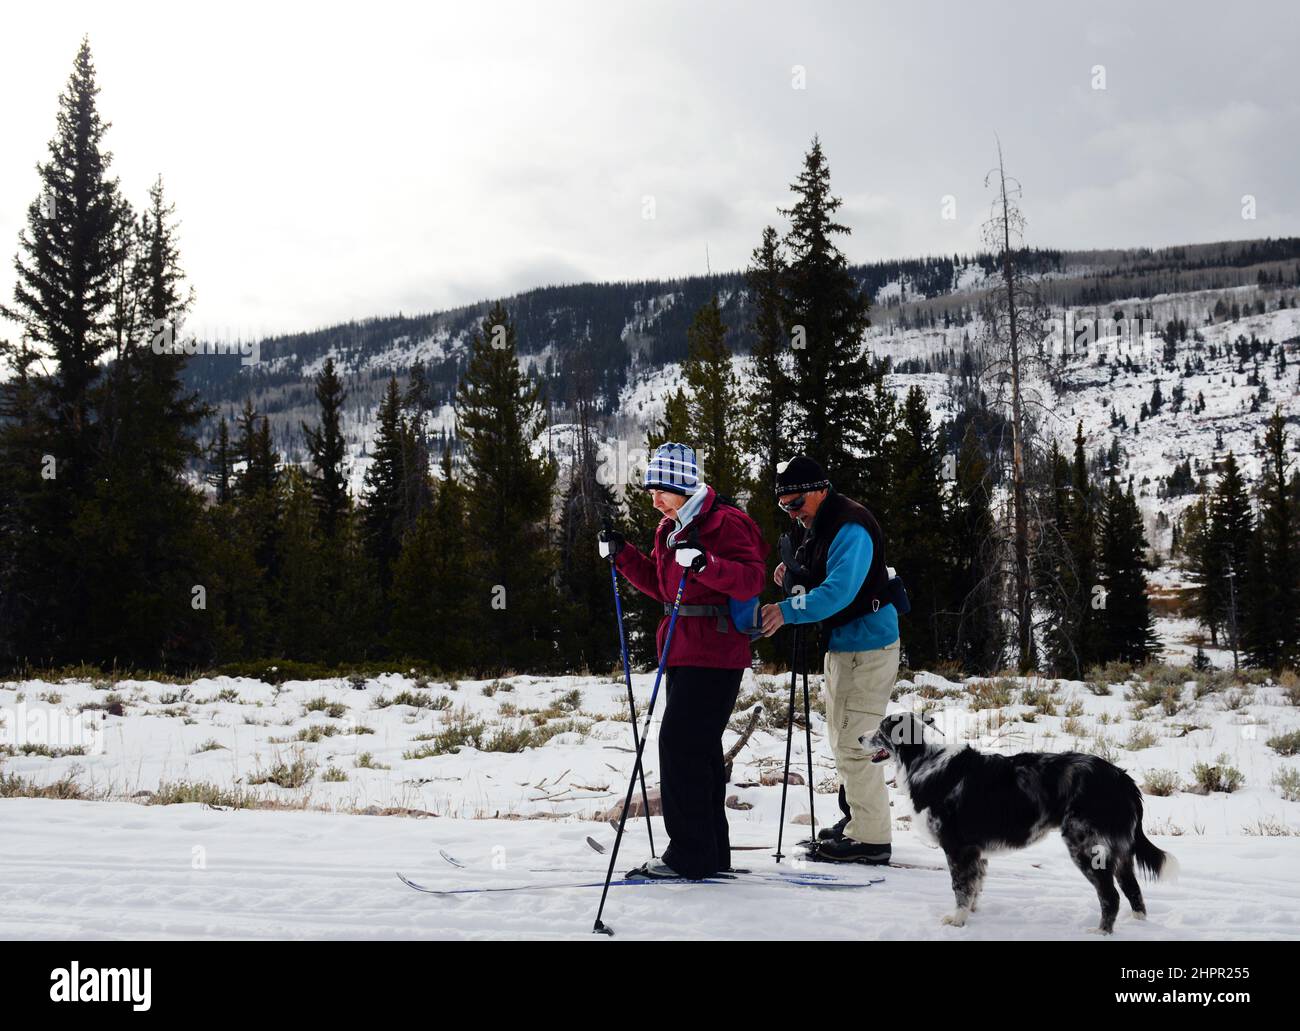 Cross country skiing on route 150 along the Provo river in the Mirror lake area in Kamas, Utah, USA. Stock Photo